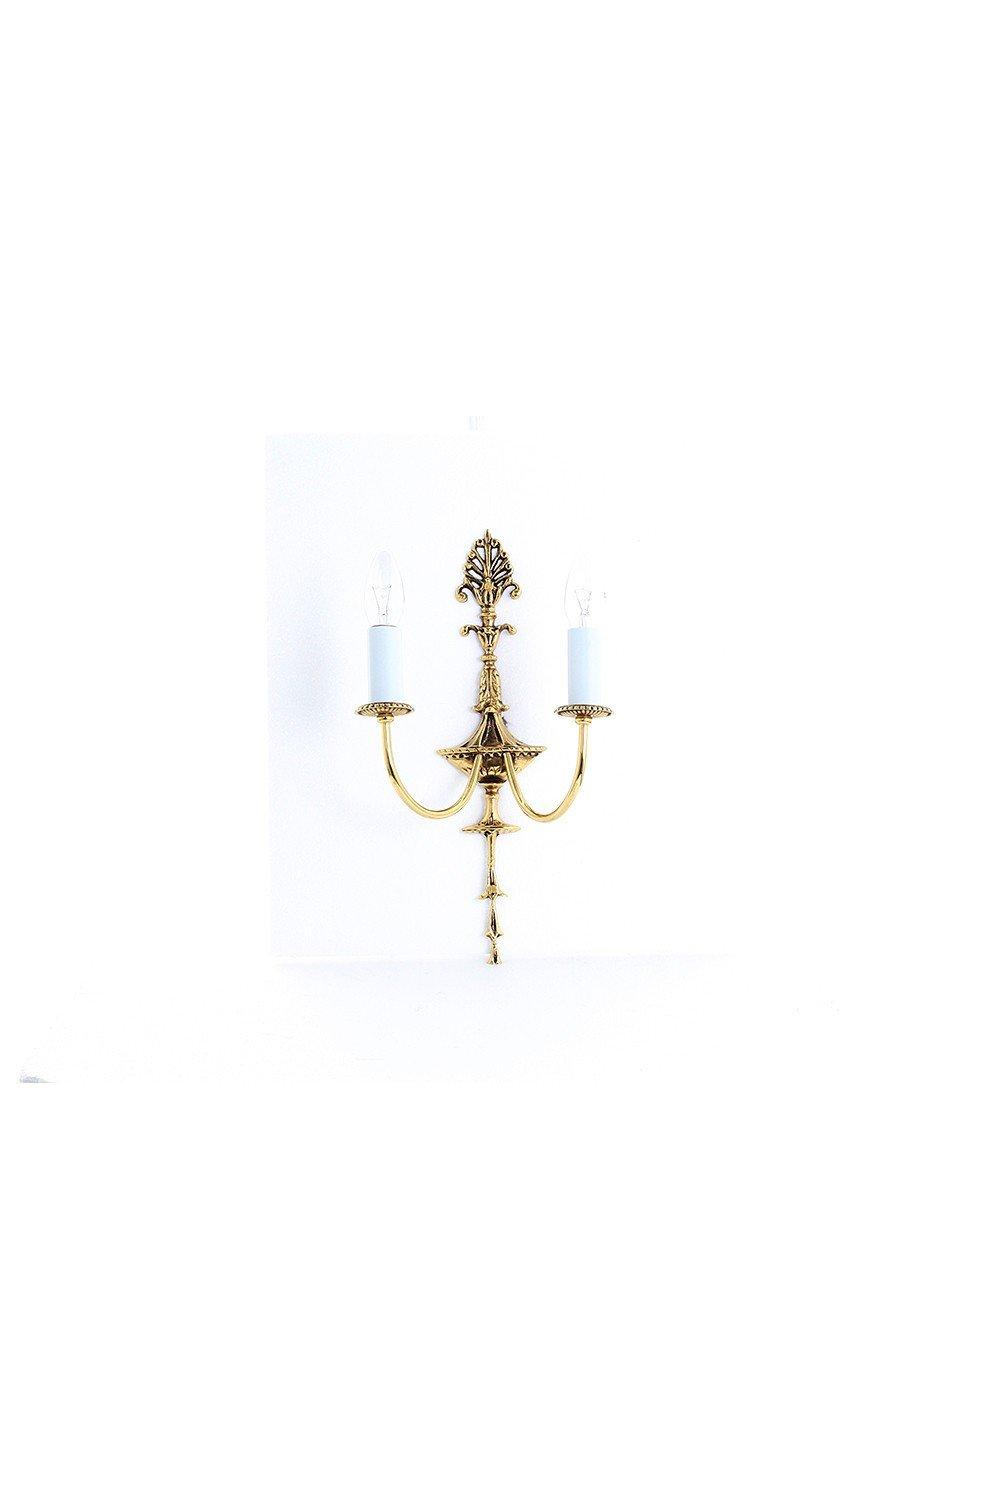 Eden Polished Brass Candle Wall Lamp